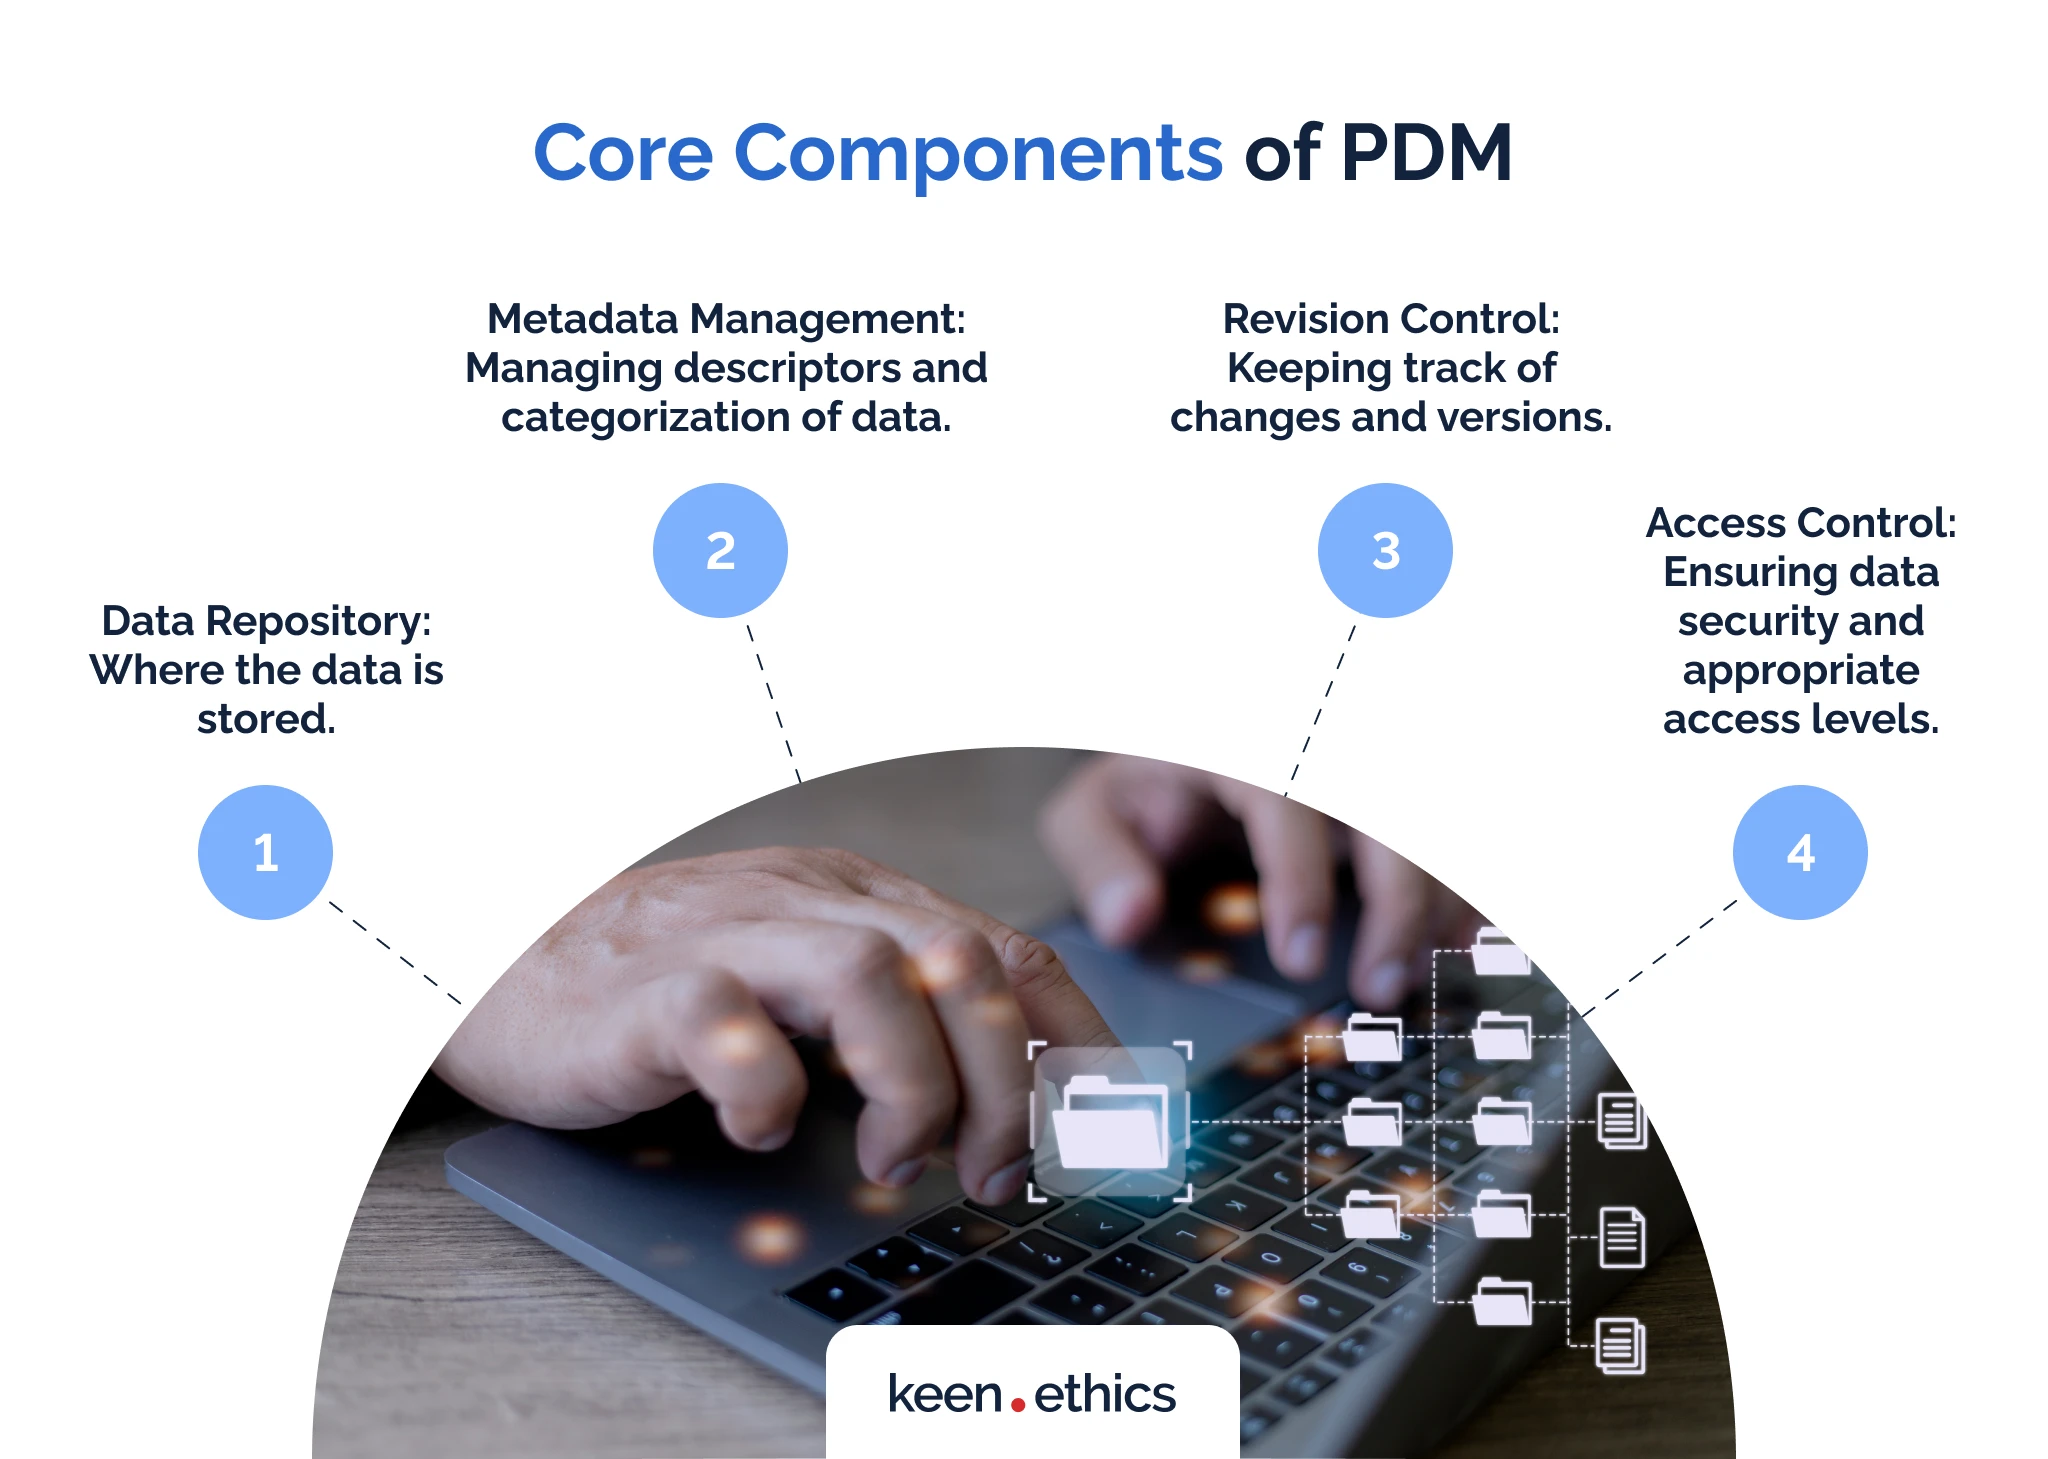 Core components of PDM